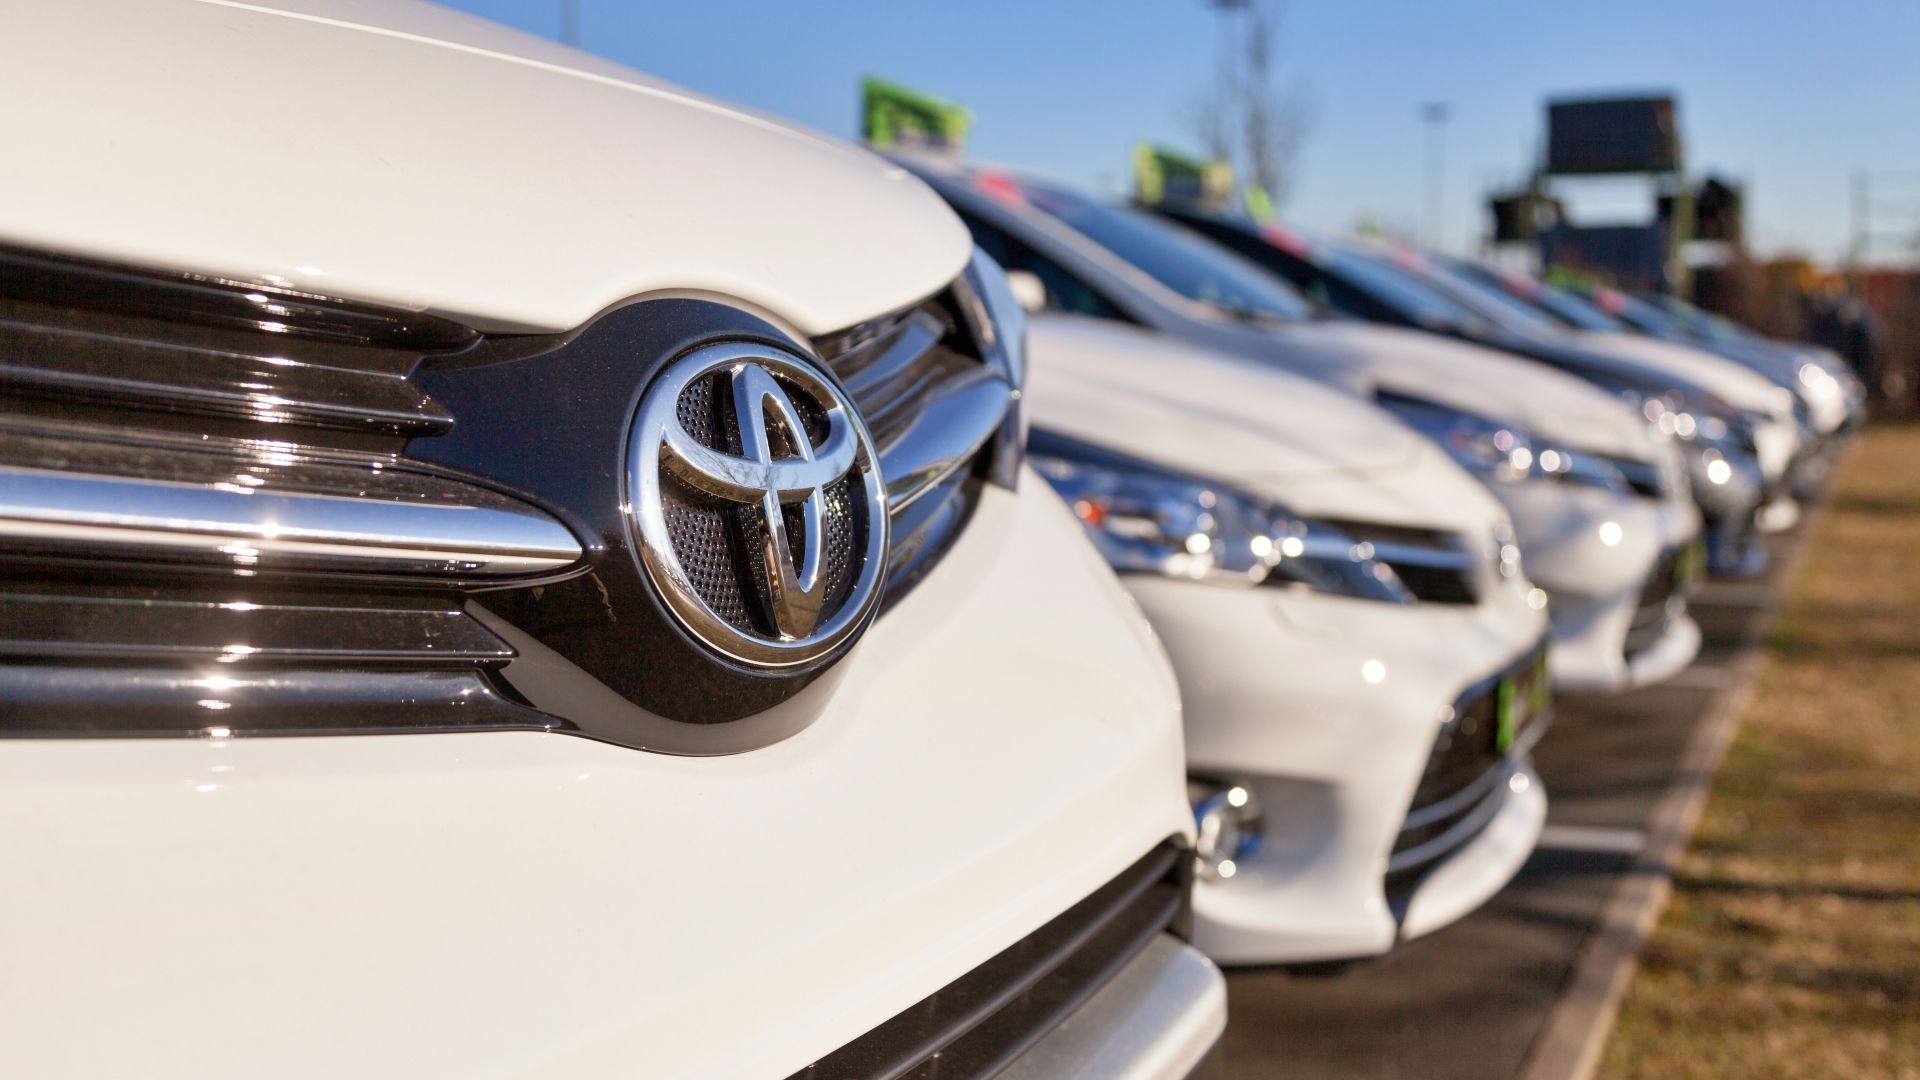 A fleet of white Toyota's at a dealership